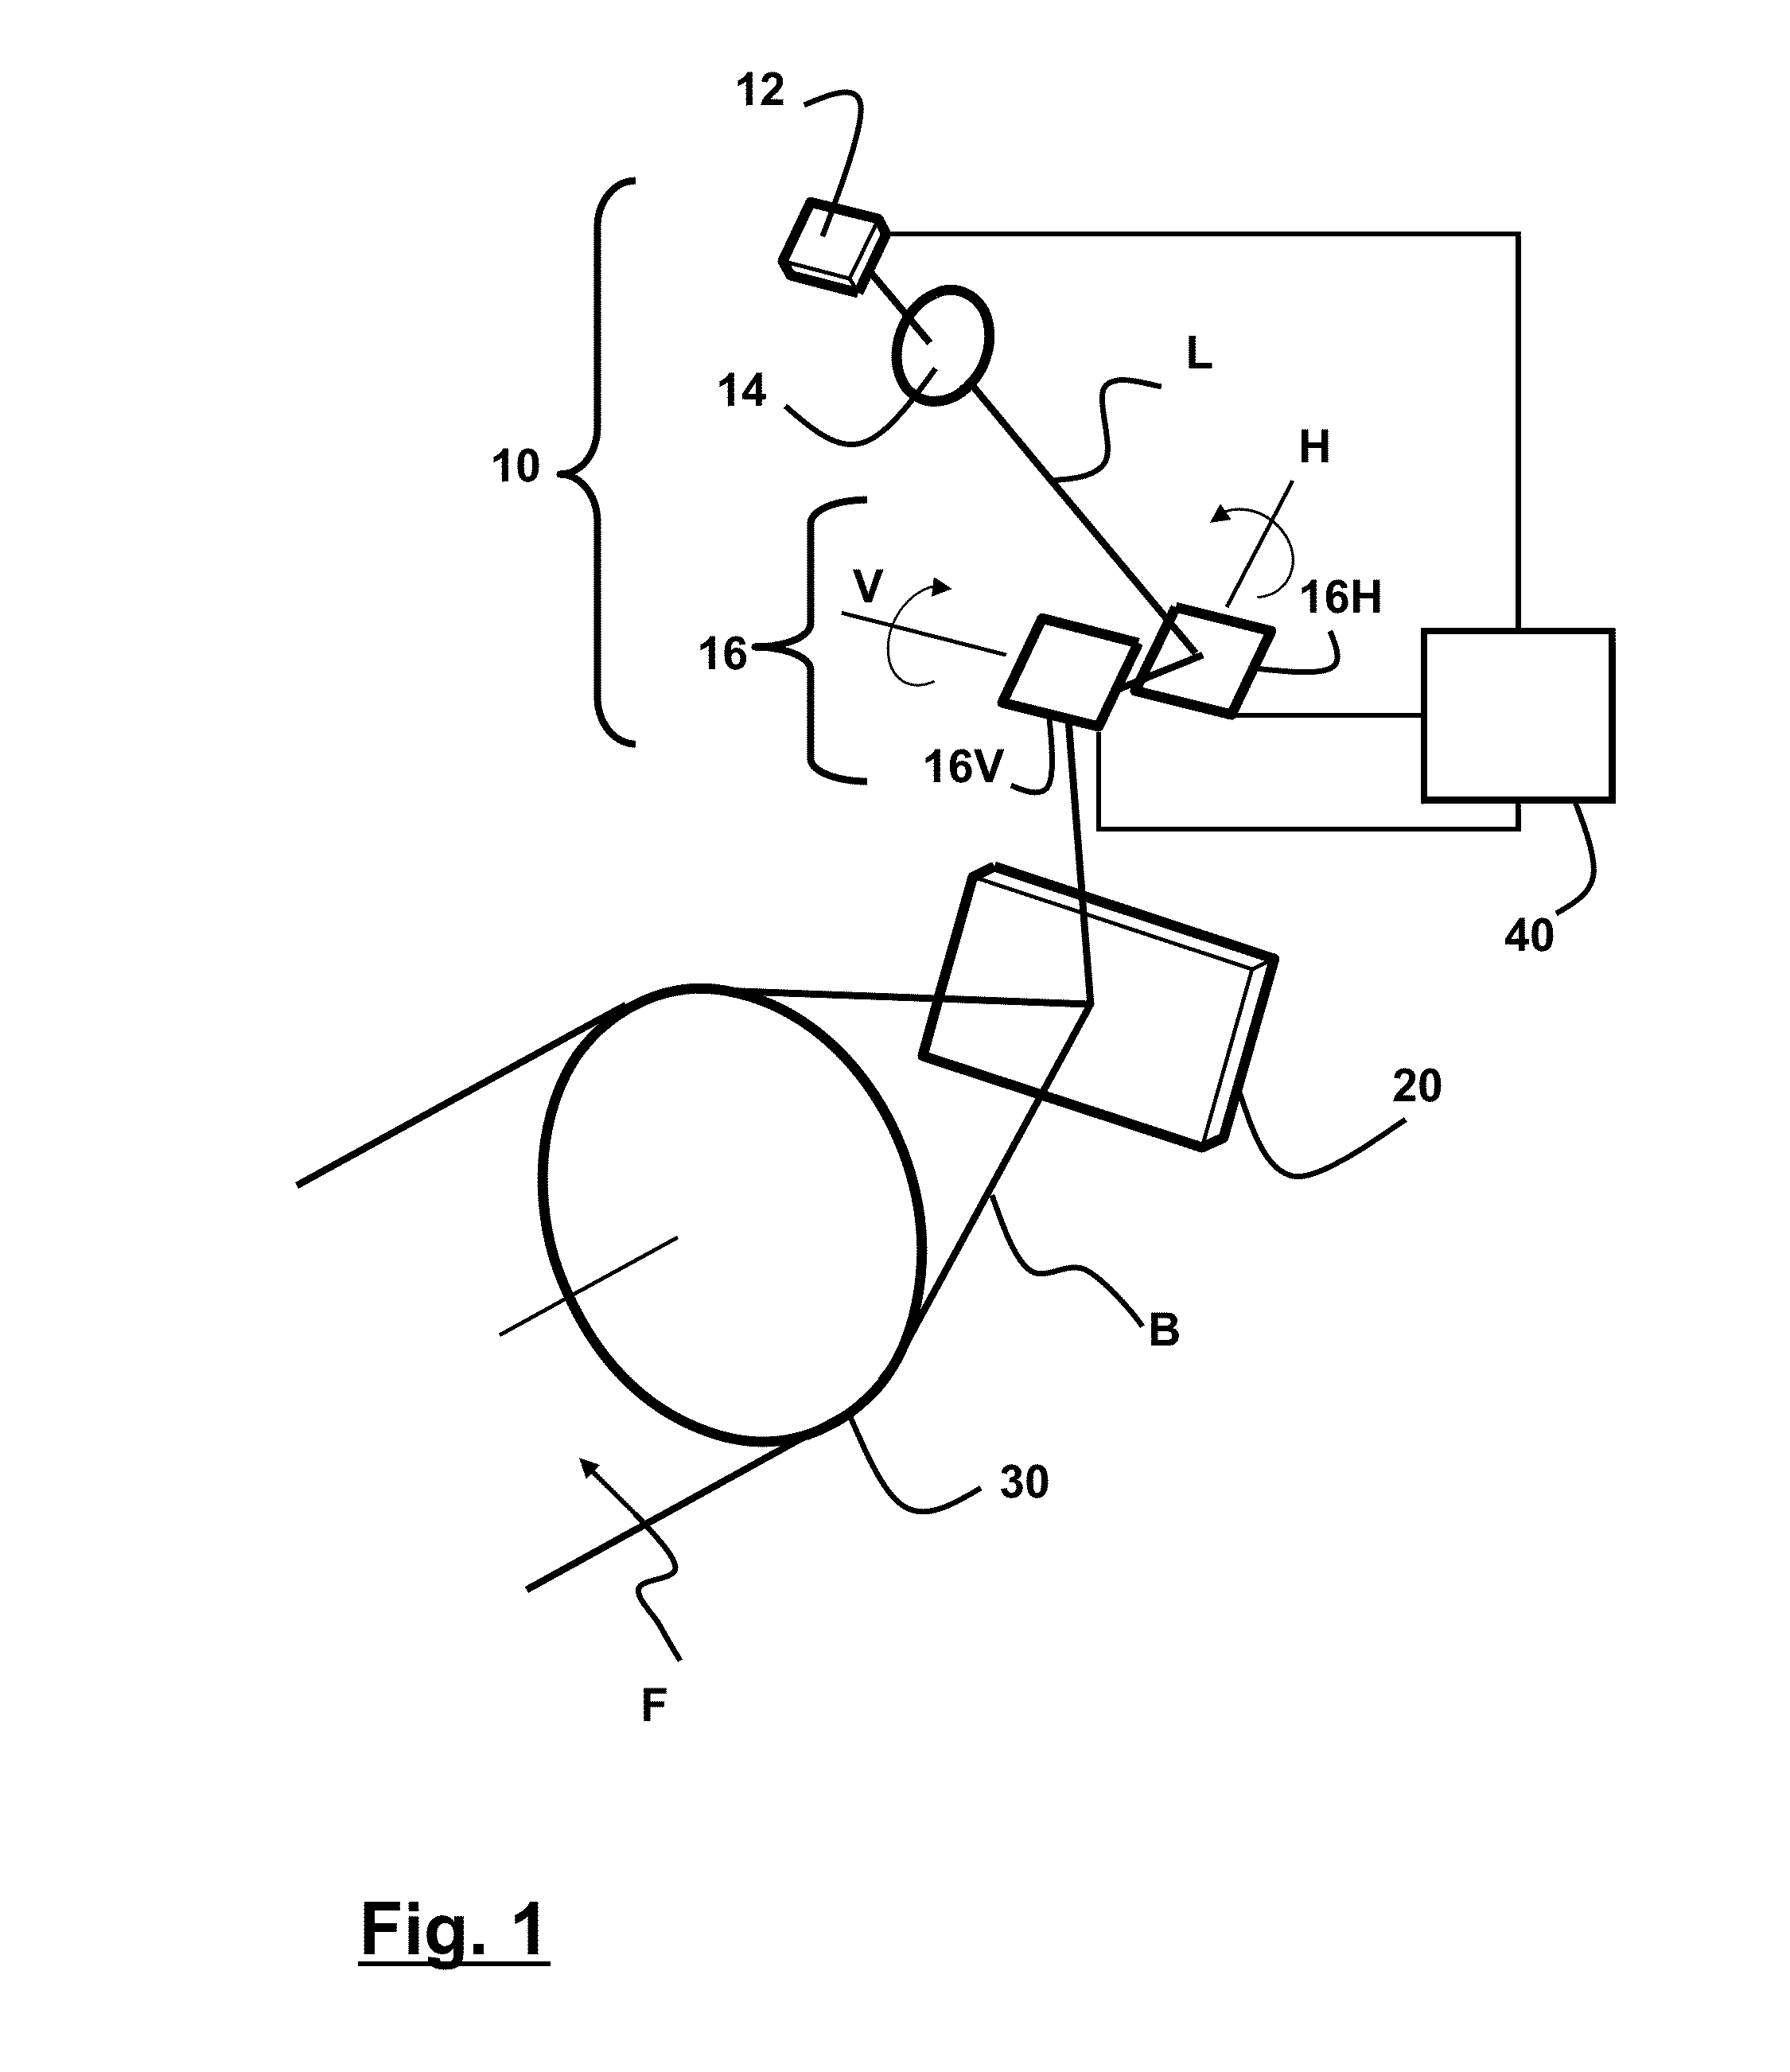 Adaptive lighting system for an automobile vehicle